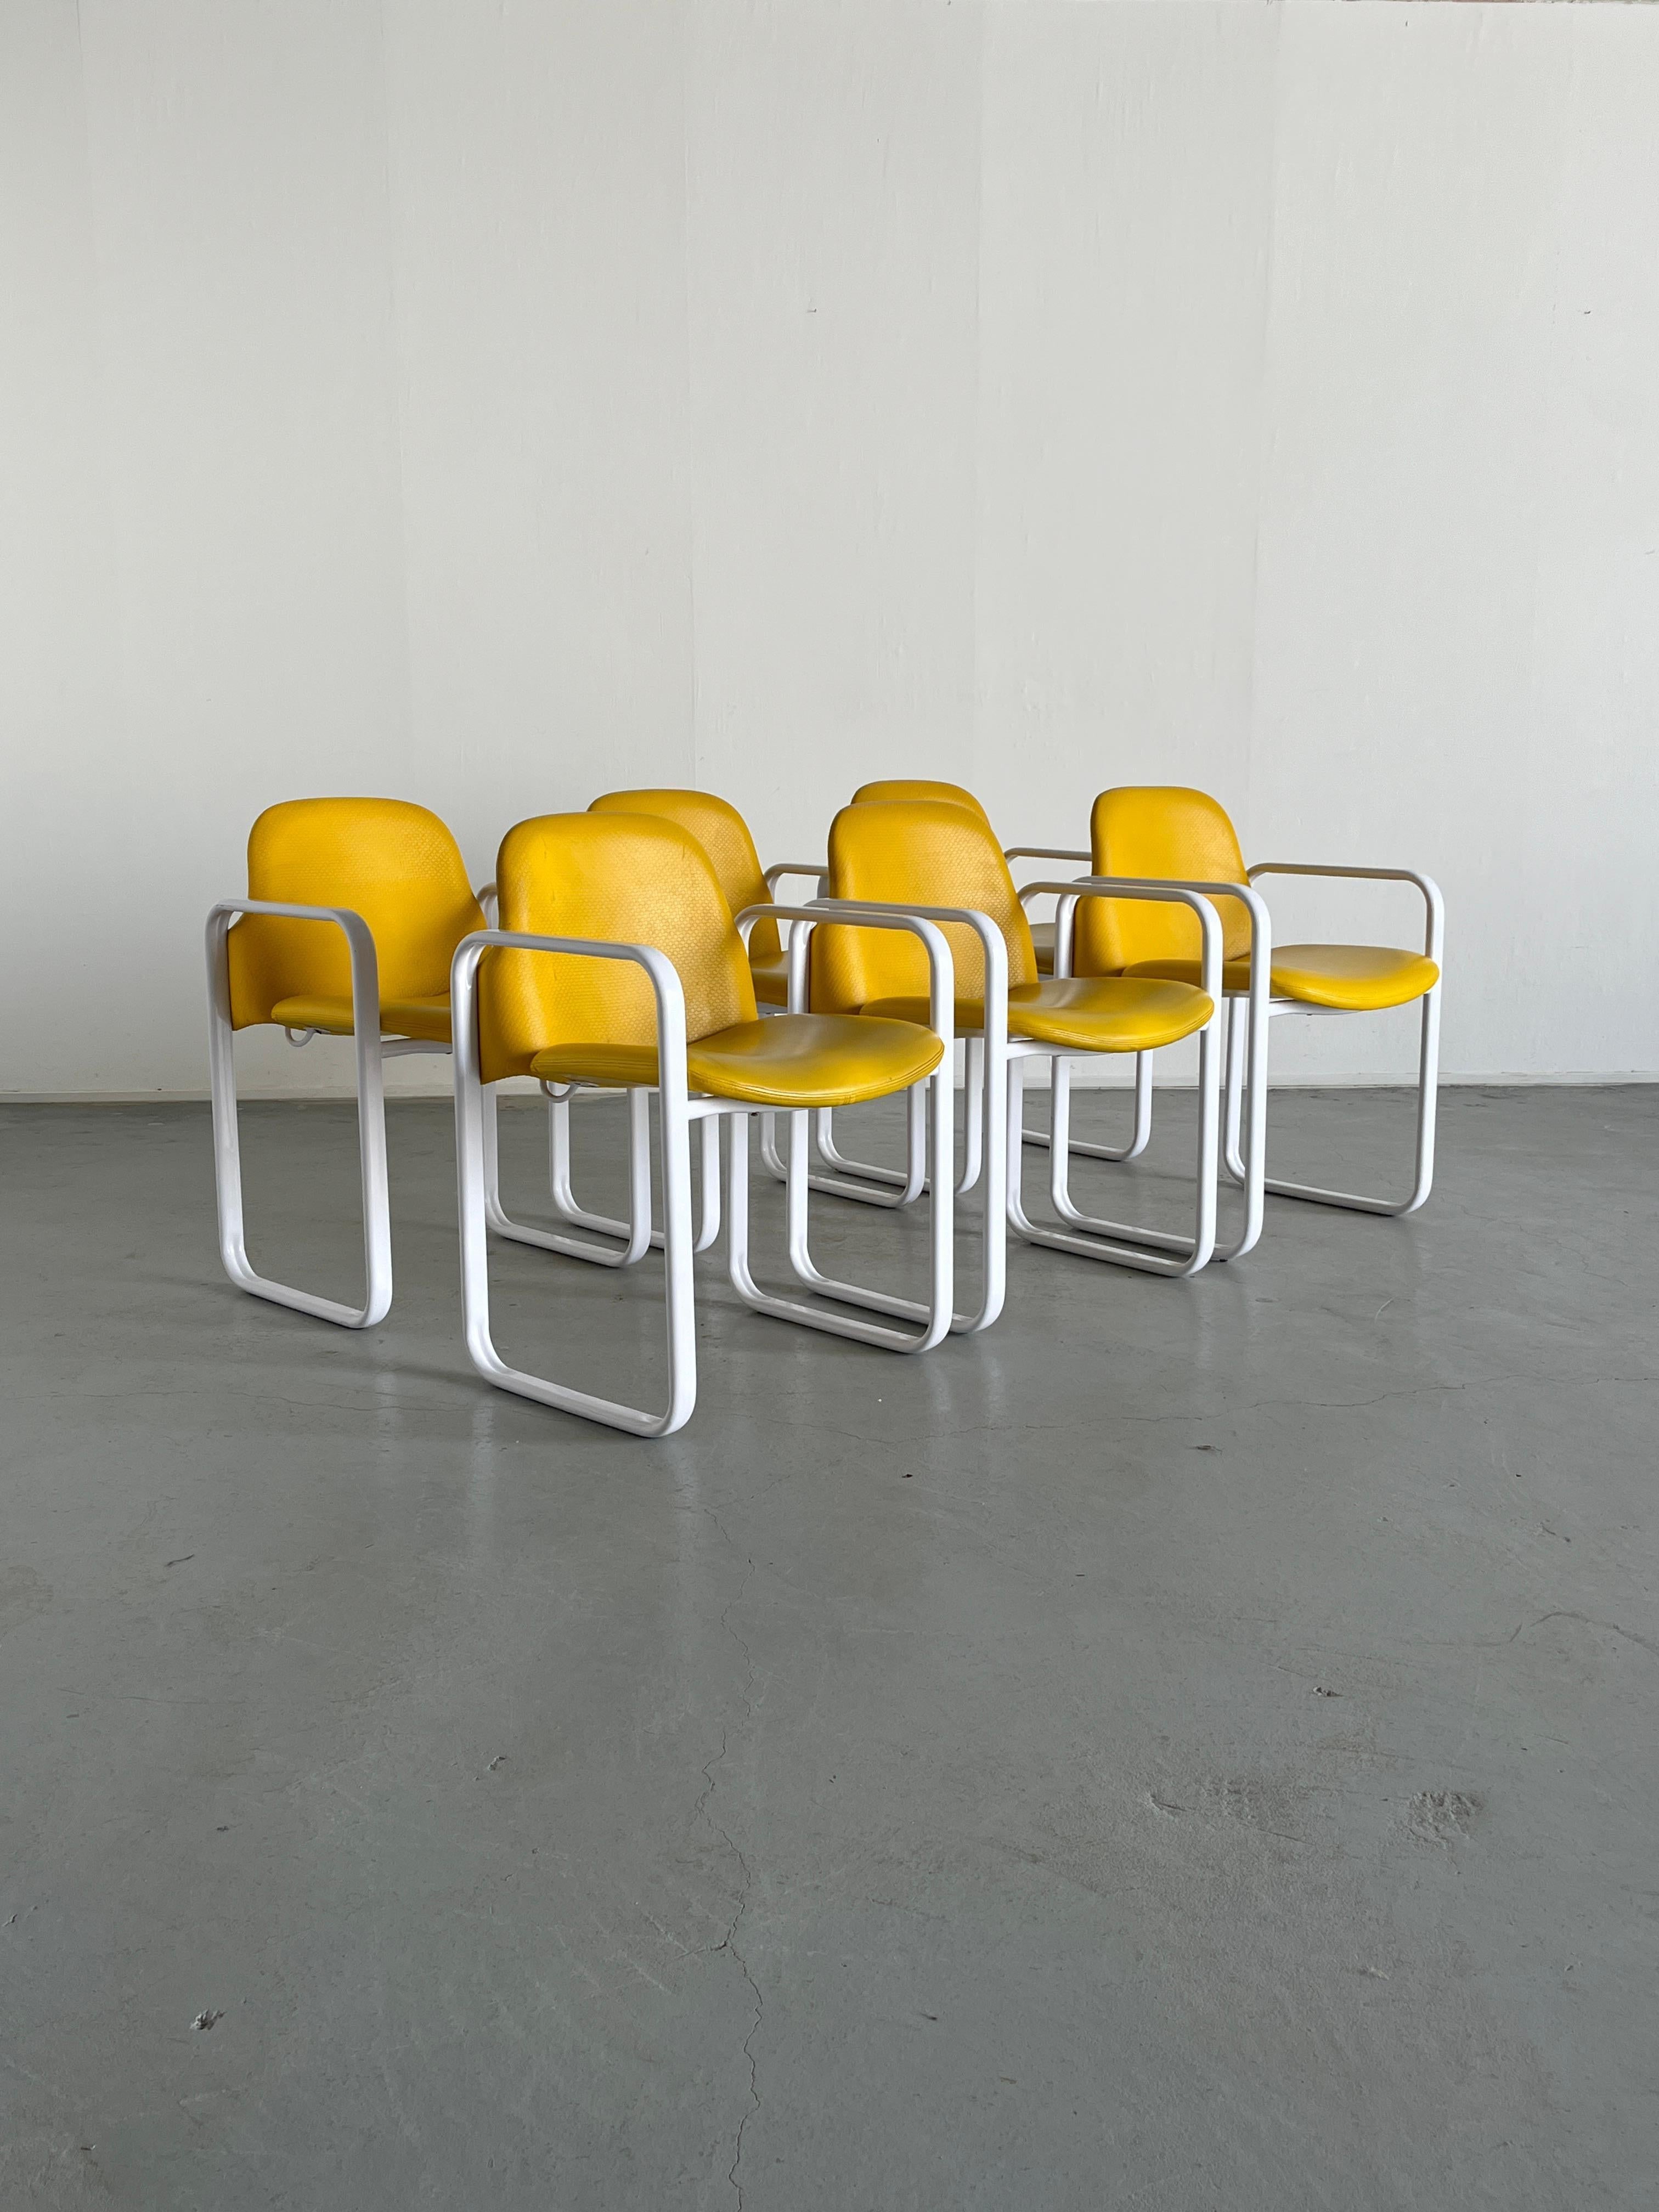 Six vintage 1980s postmodern design armchairs, produced by Thema Italy.
White metal structure and yellow faux leather upholstery. Backside faux leather has a pattern while the seating one is smooth.
Reminiscent of Orsay chairs by Gae Aulenti for